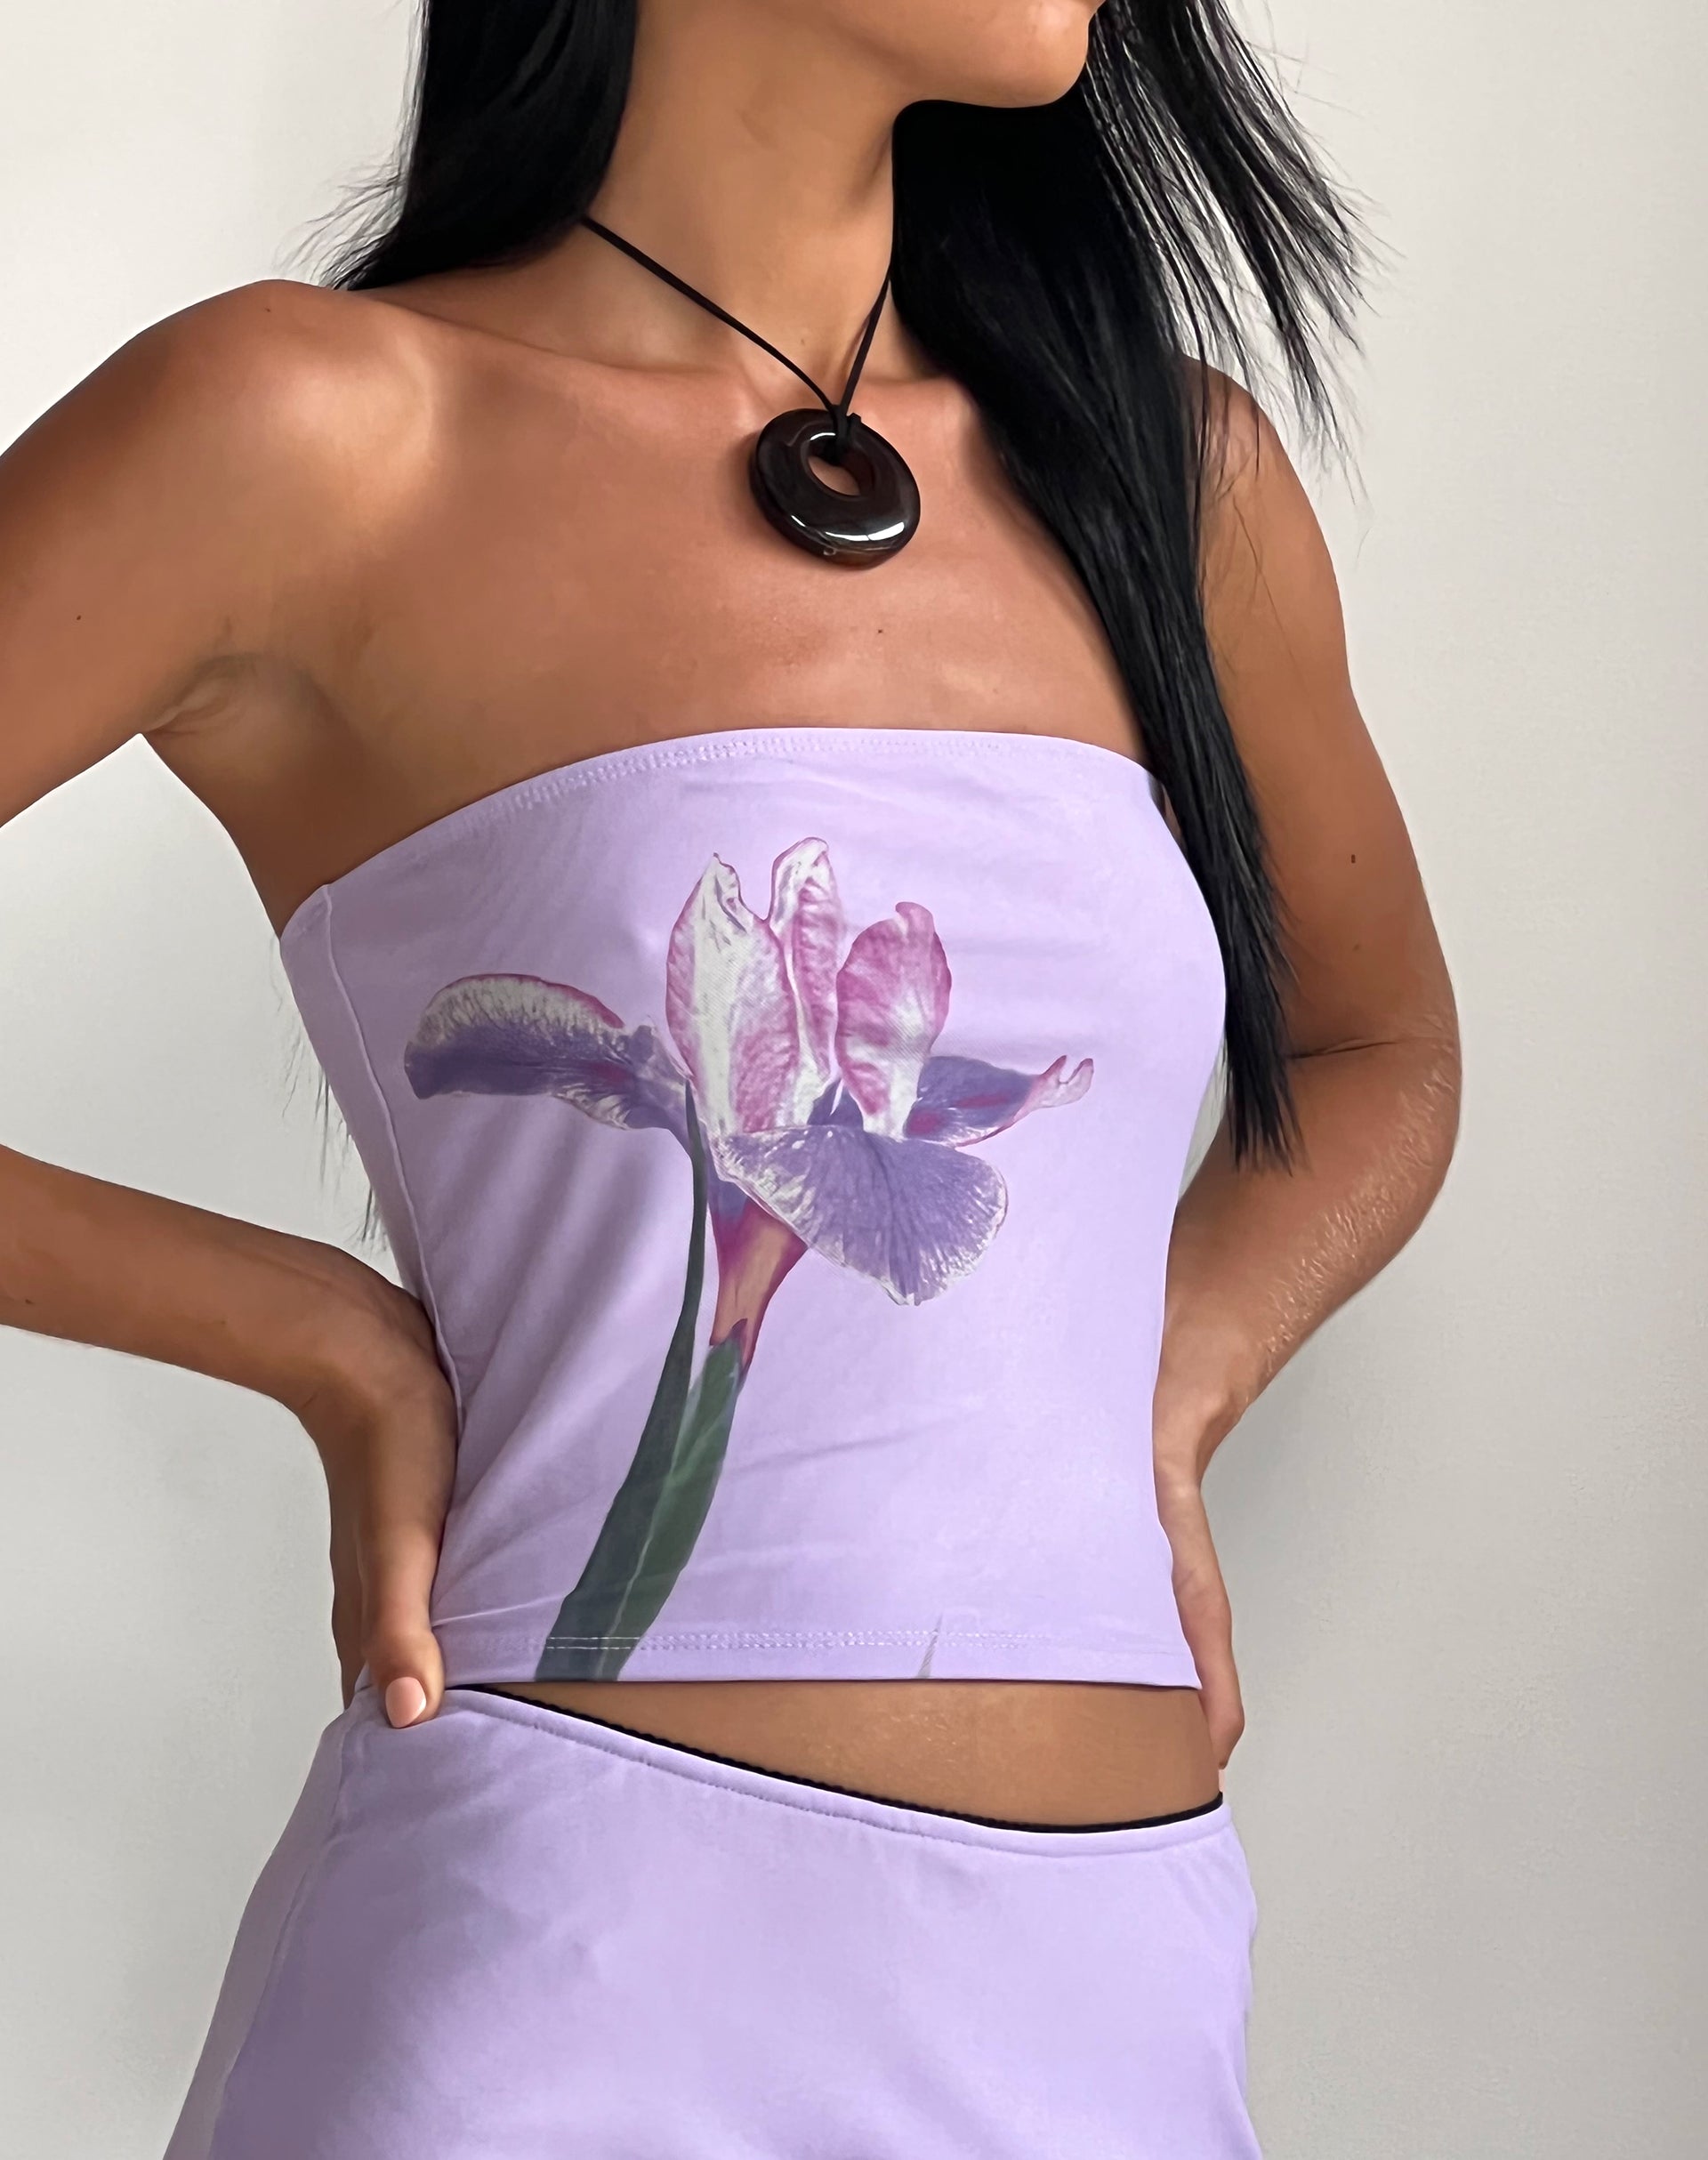 image of Shae Bandeau Top in Lilac Flower Placement